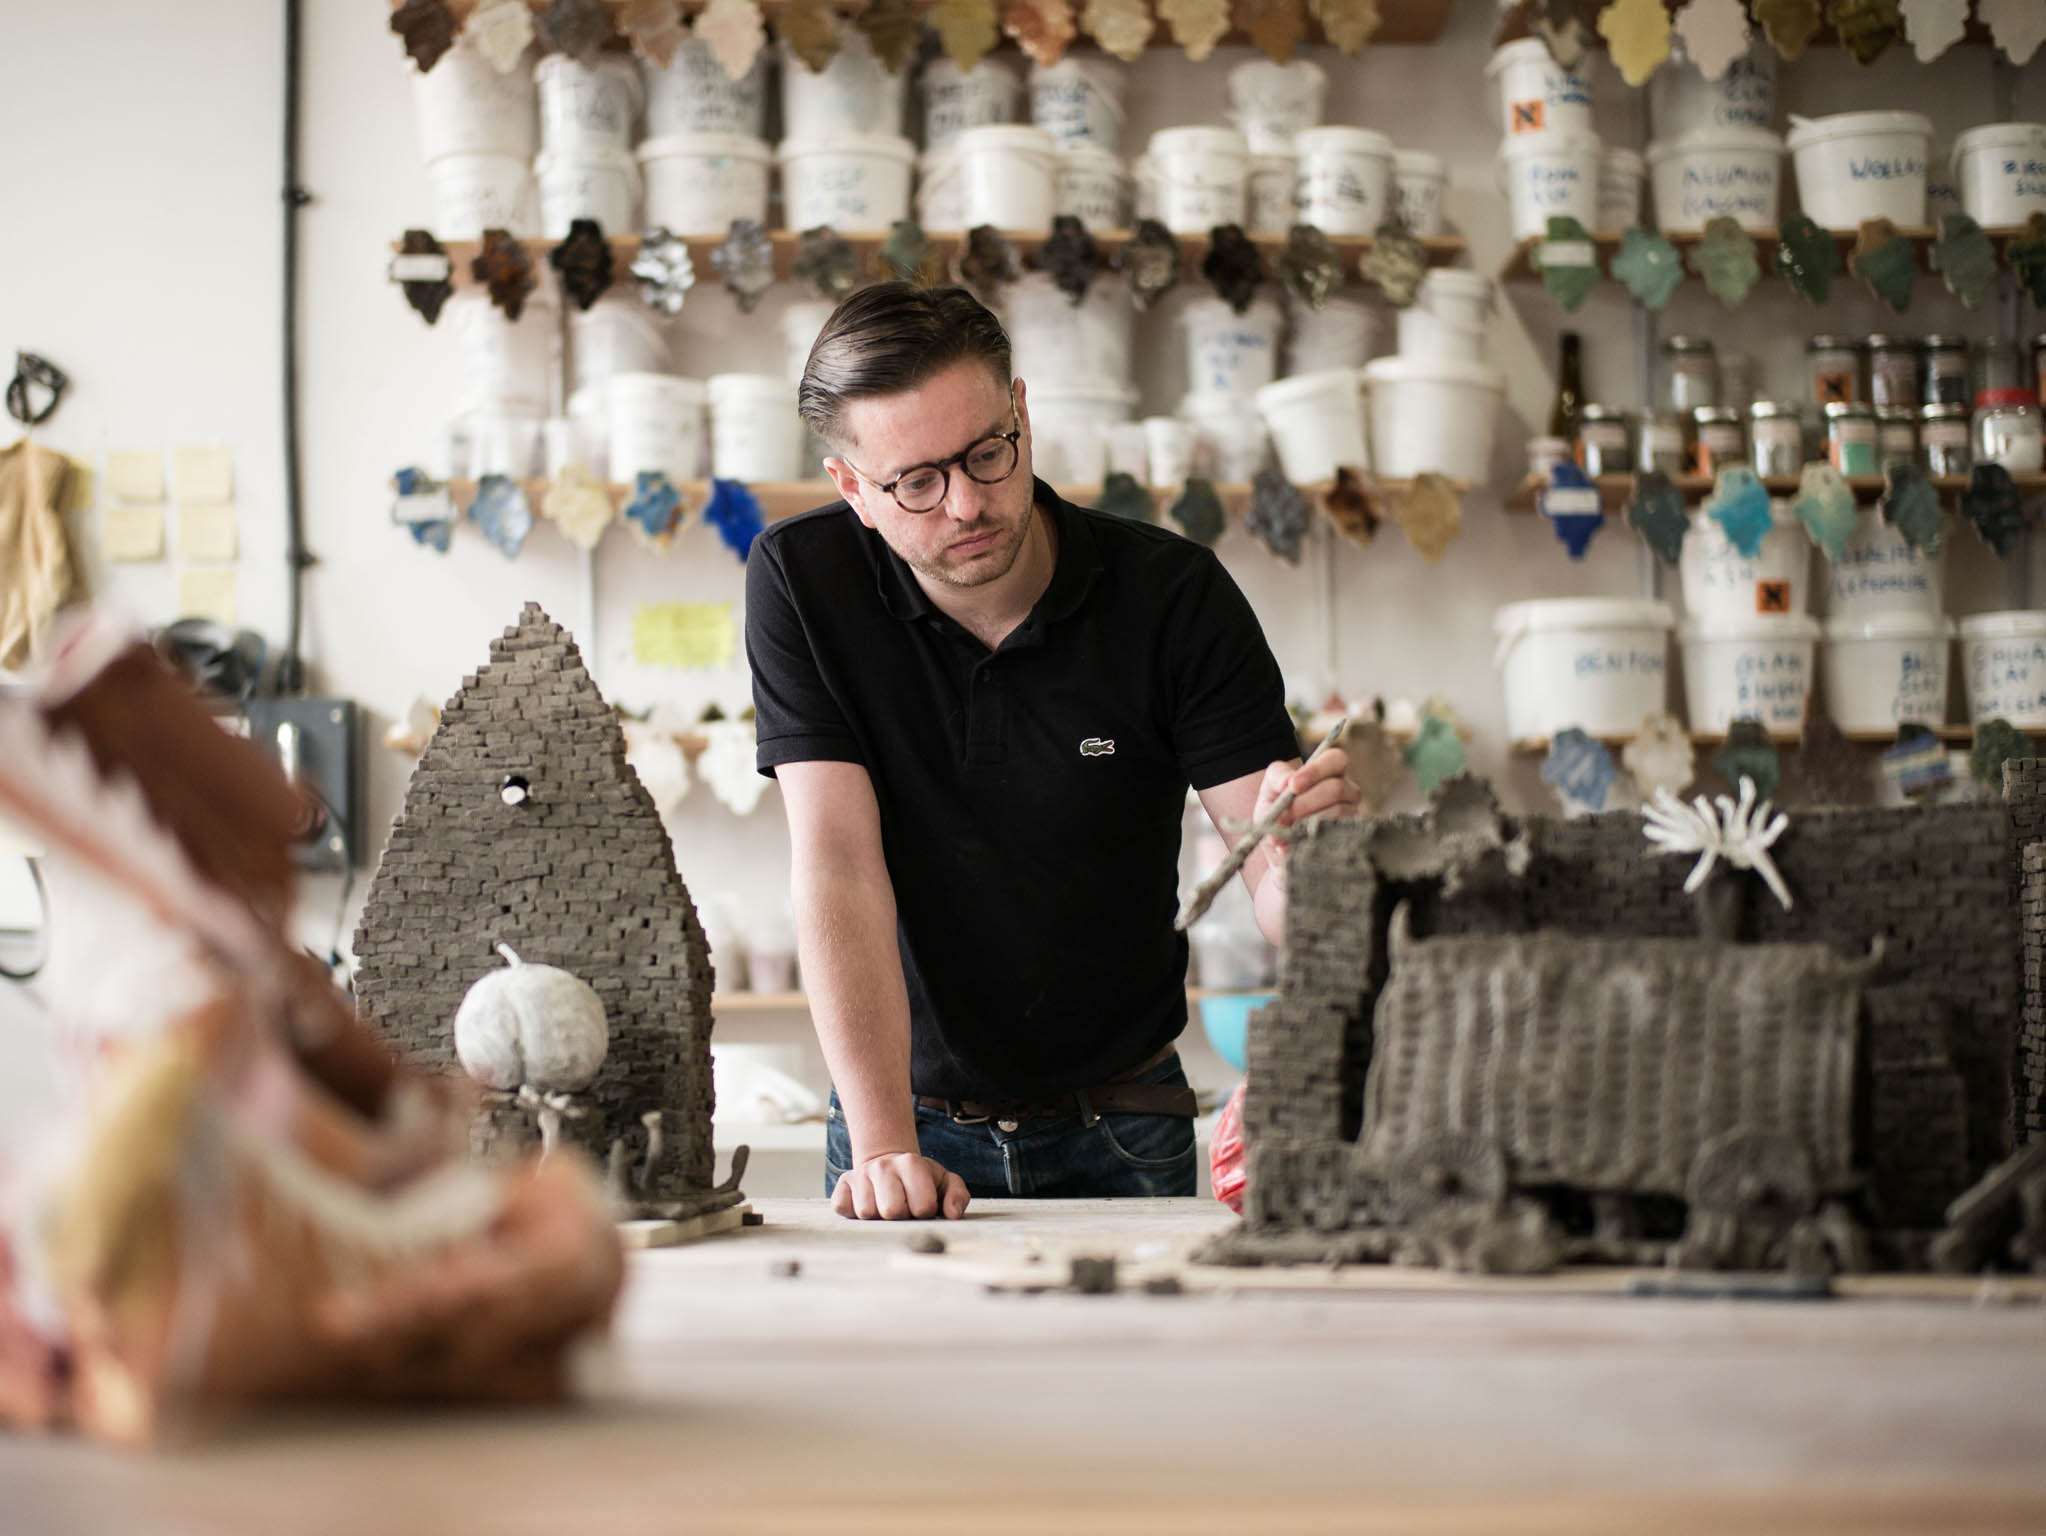 &#13;
Aaron Angell runs Troy Town Art Pottery, a ceramic studio based in East London&#13;